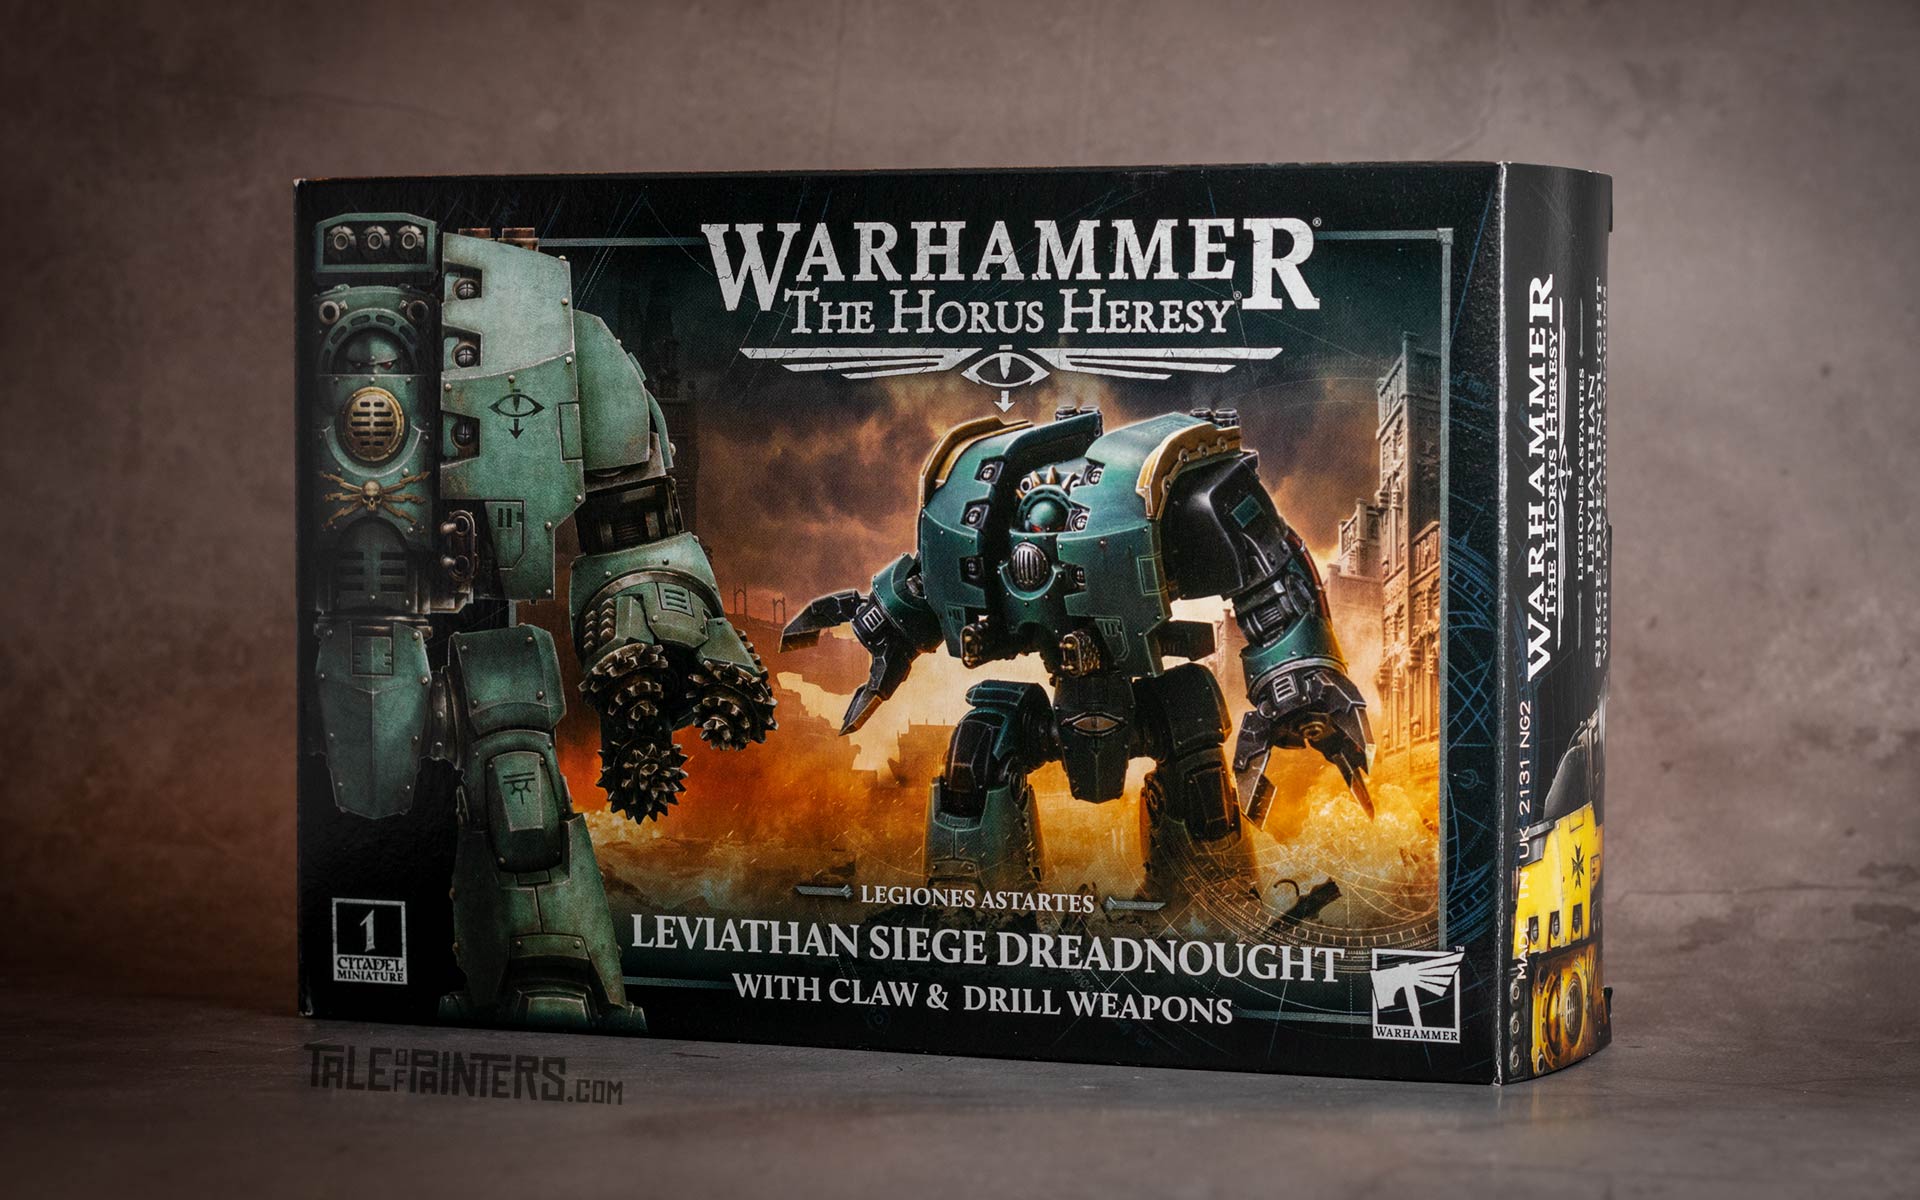 Leviathan Siege Dreadnought with claw and drill weapons packaging